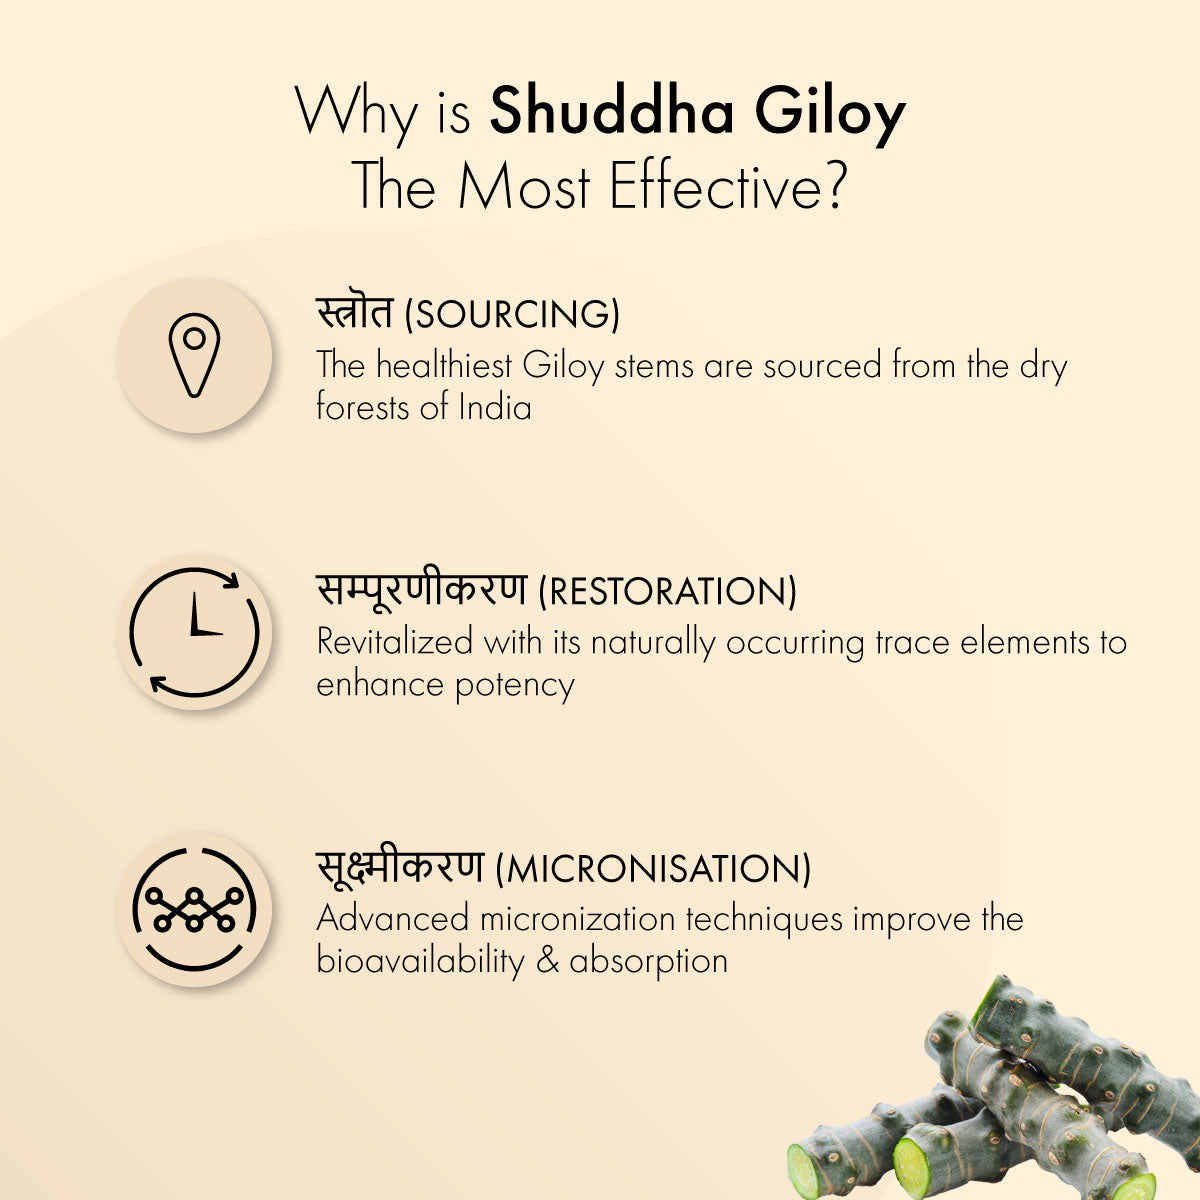 Shuddha Giloy Tablets: Most Effective Immunity Booster & Blood Purifier